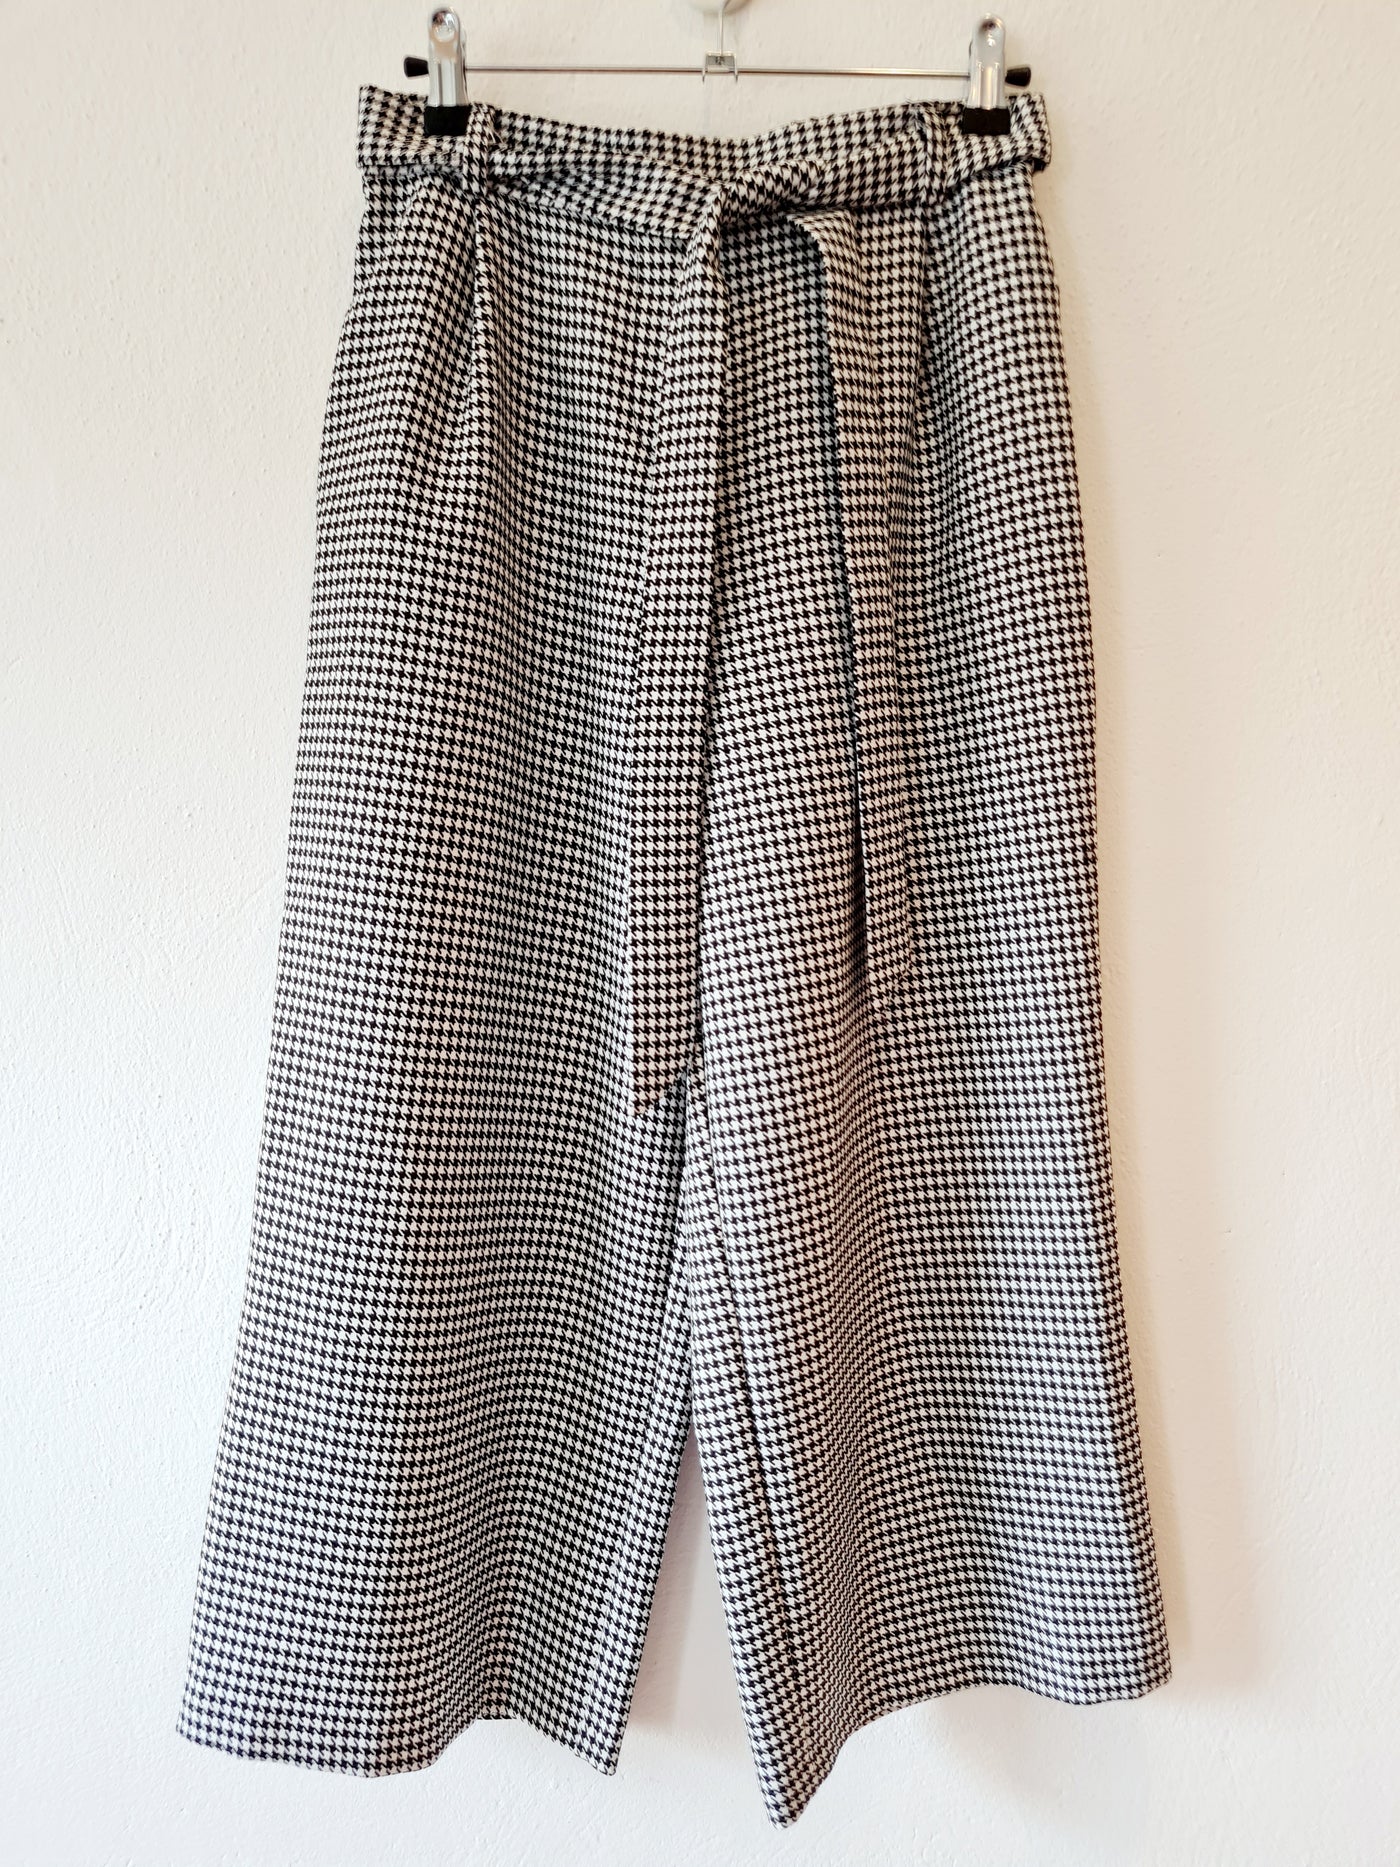 ASOS Dogtooth Trousers 8